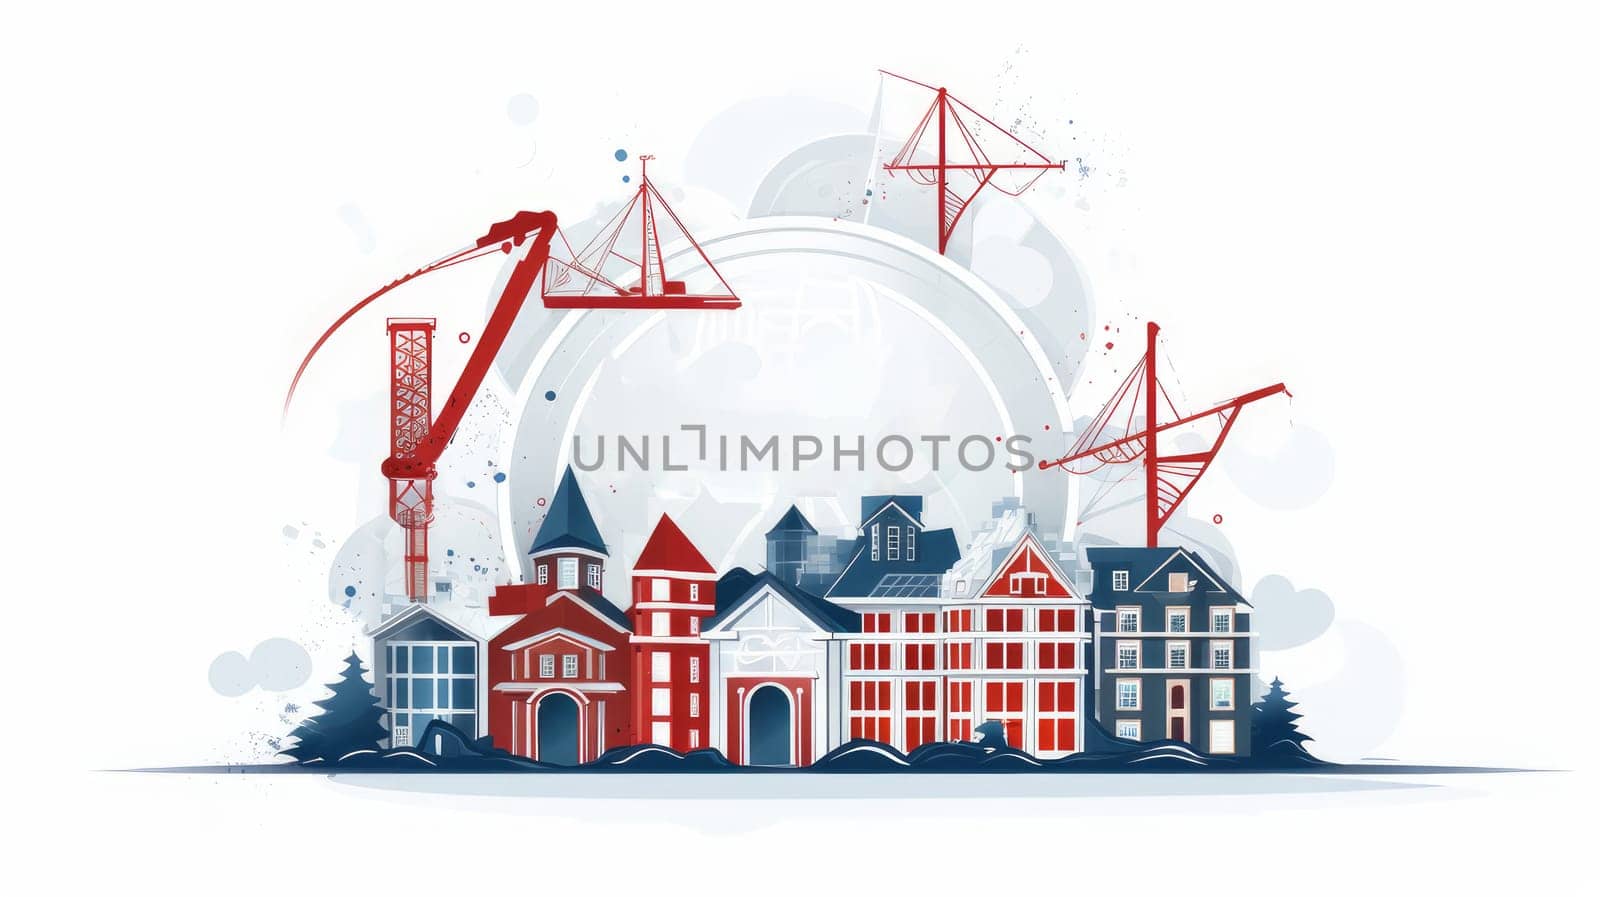 Logo of a luxury real estate or construction company on a white background